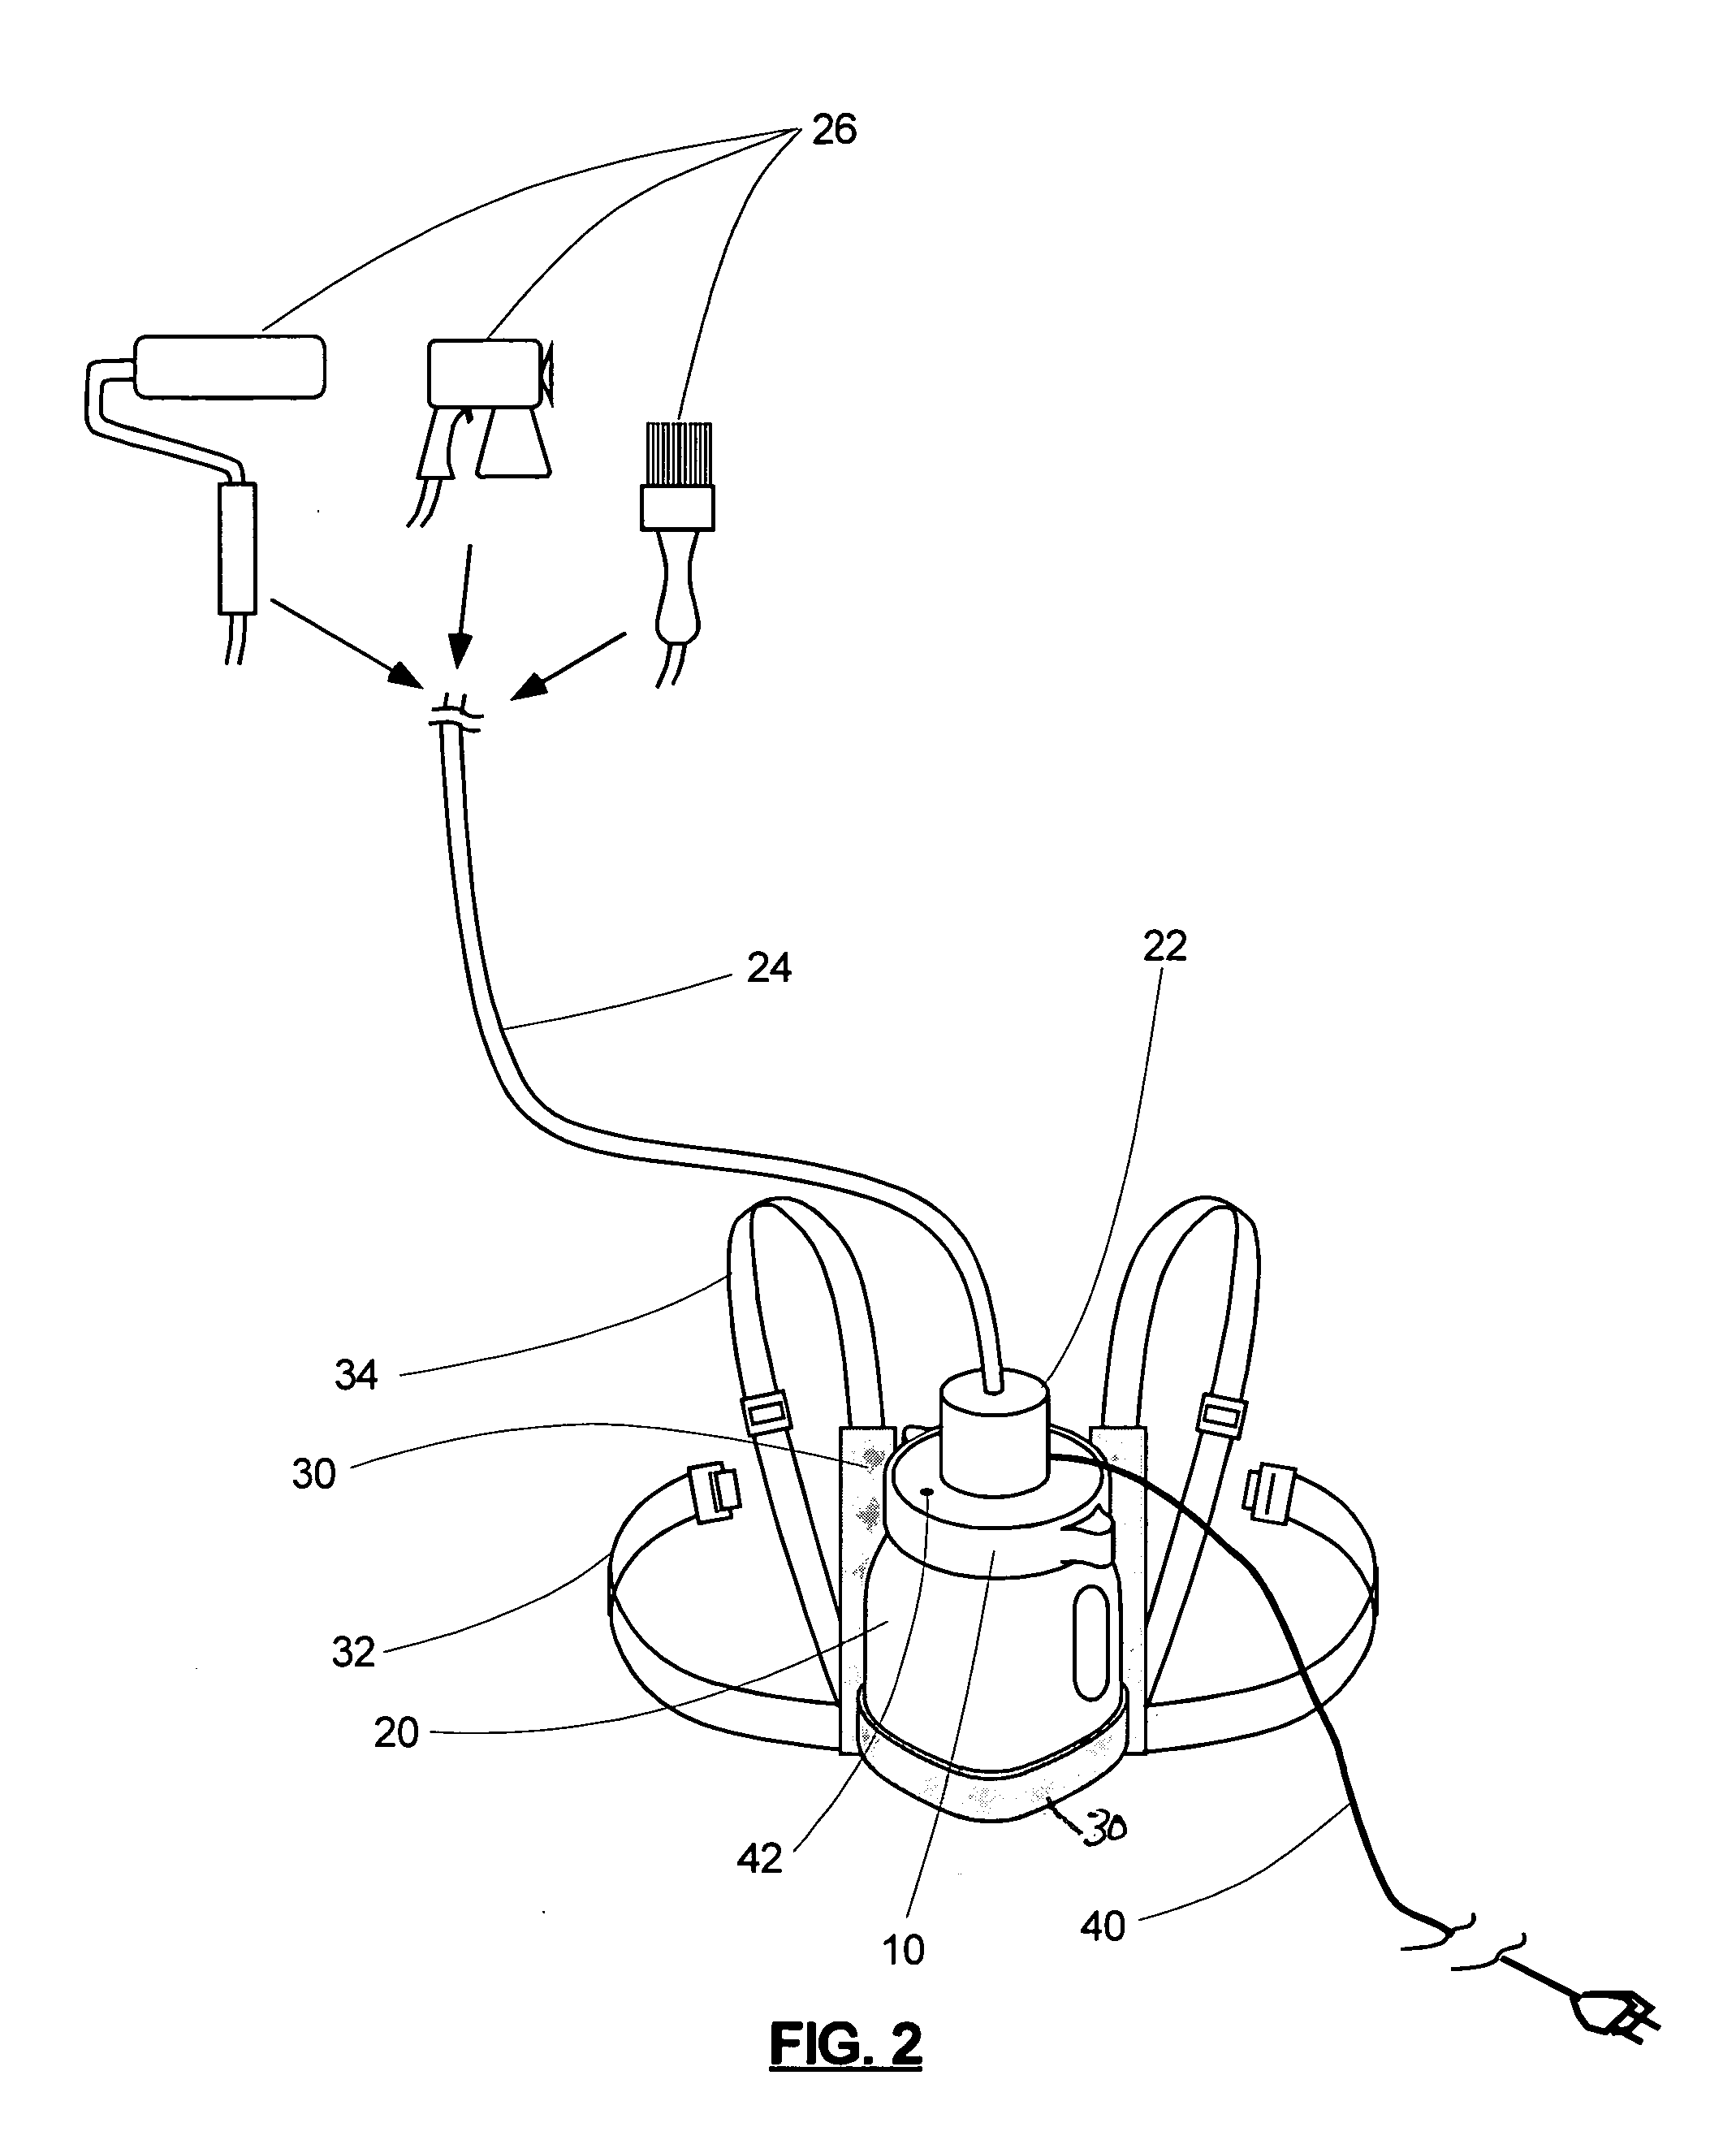 Fluid dispensing system using an interface device attached to the top of a container for viscous fluids, paints, and the like